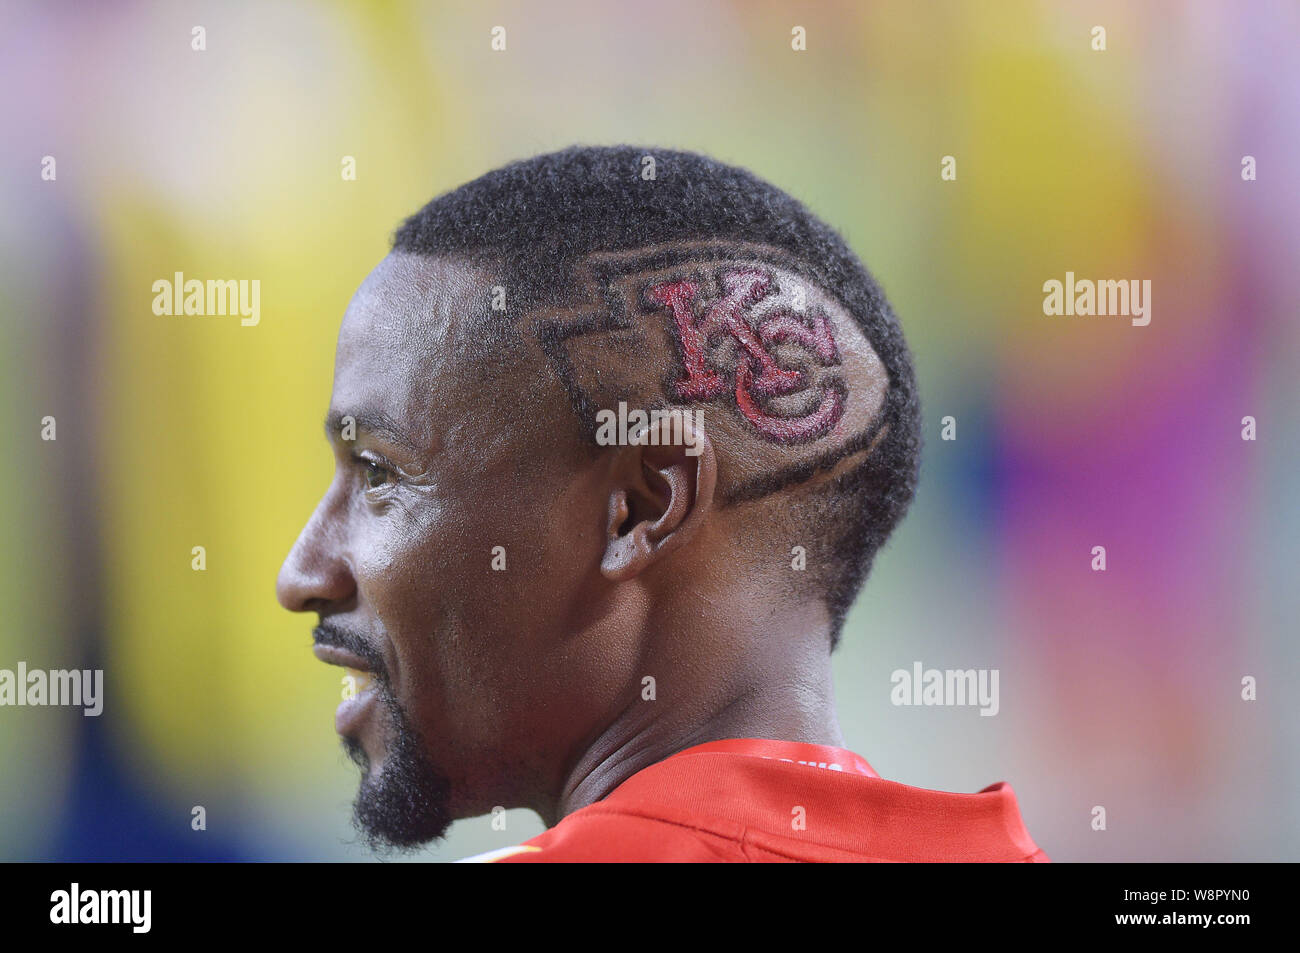 Kansas City, Missouri, USA. 10th August, 2019. A member of the Chiefs Flag Warriors sports a haircut with the Chiefs logo during the NFL Football Game between the Cincinnati Bengals and the Kansas City Chiefs at Arrowhead Stadium in Kansas City, Missouri. Kendall Shaw/CSM Credit: Cal Sport Media/Alamy Live News Stock Photo